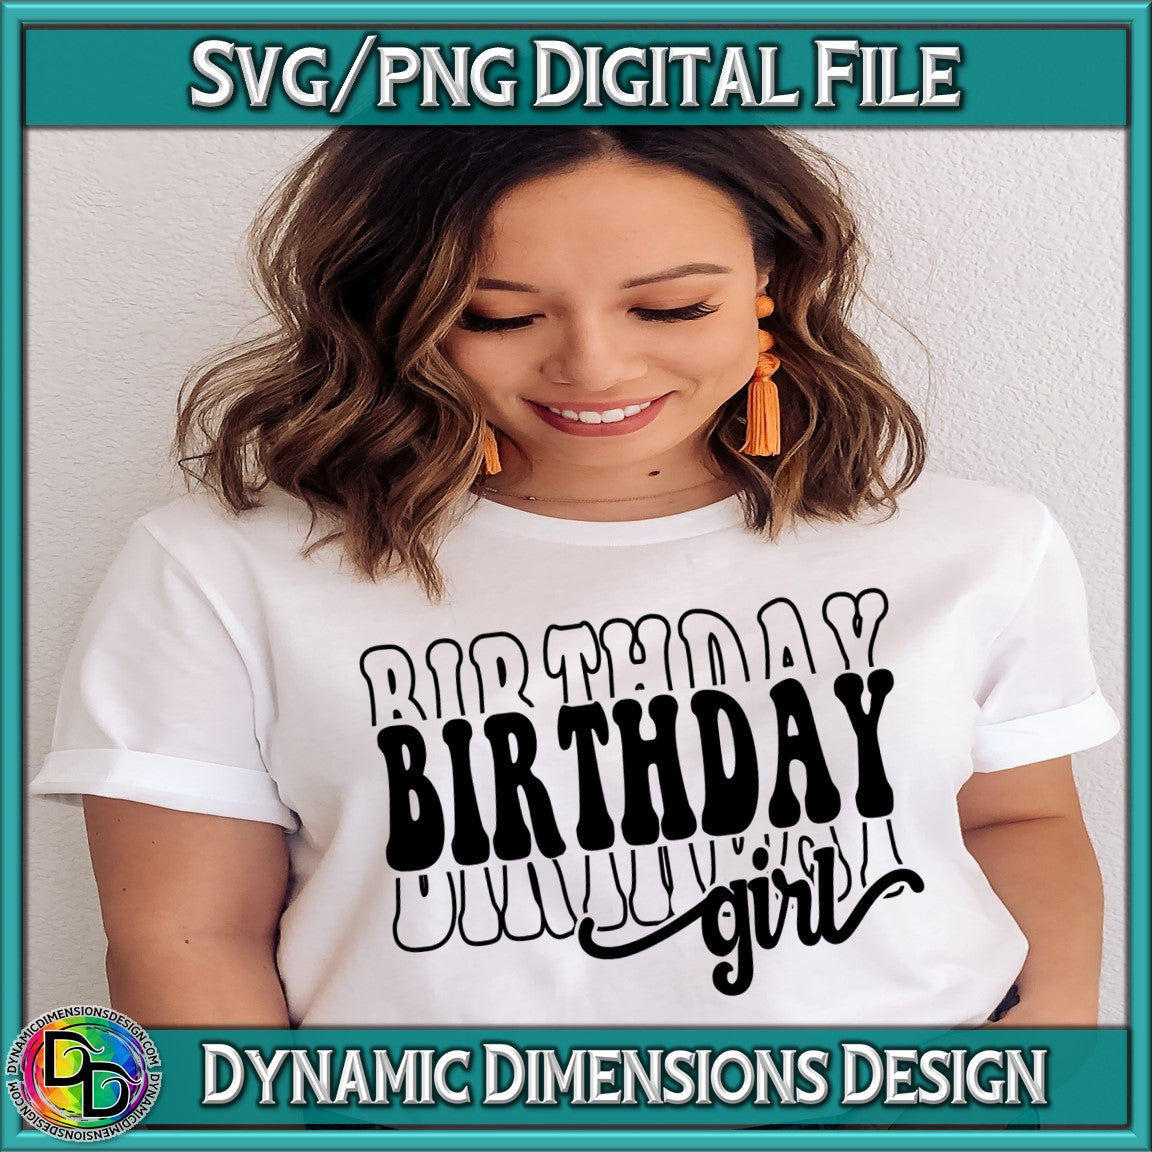 Retro Birthday Girl Stacked svg, png, instant download, dxf, eps, pdf, jpg, cricut, silhouette, sublimtion, printable